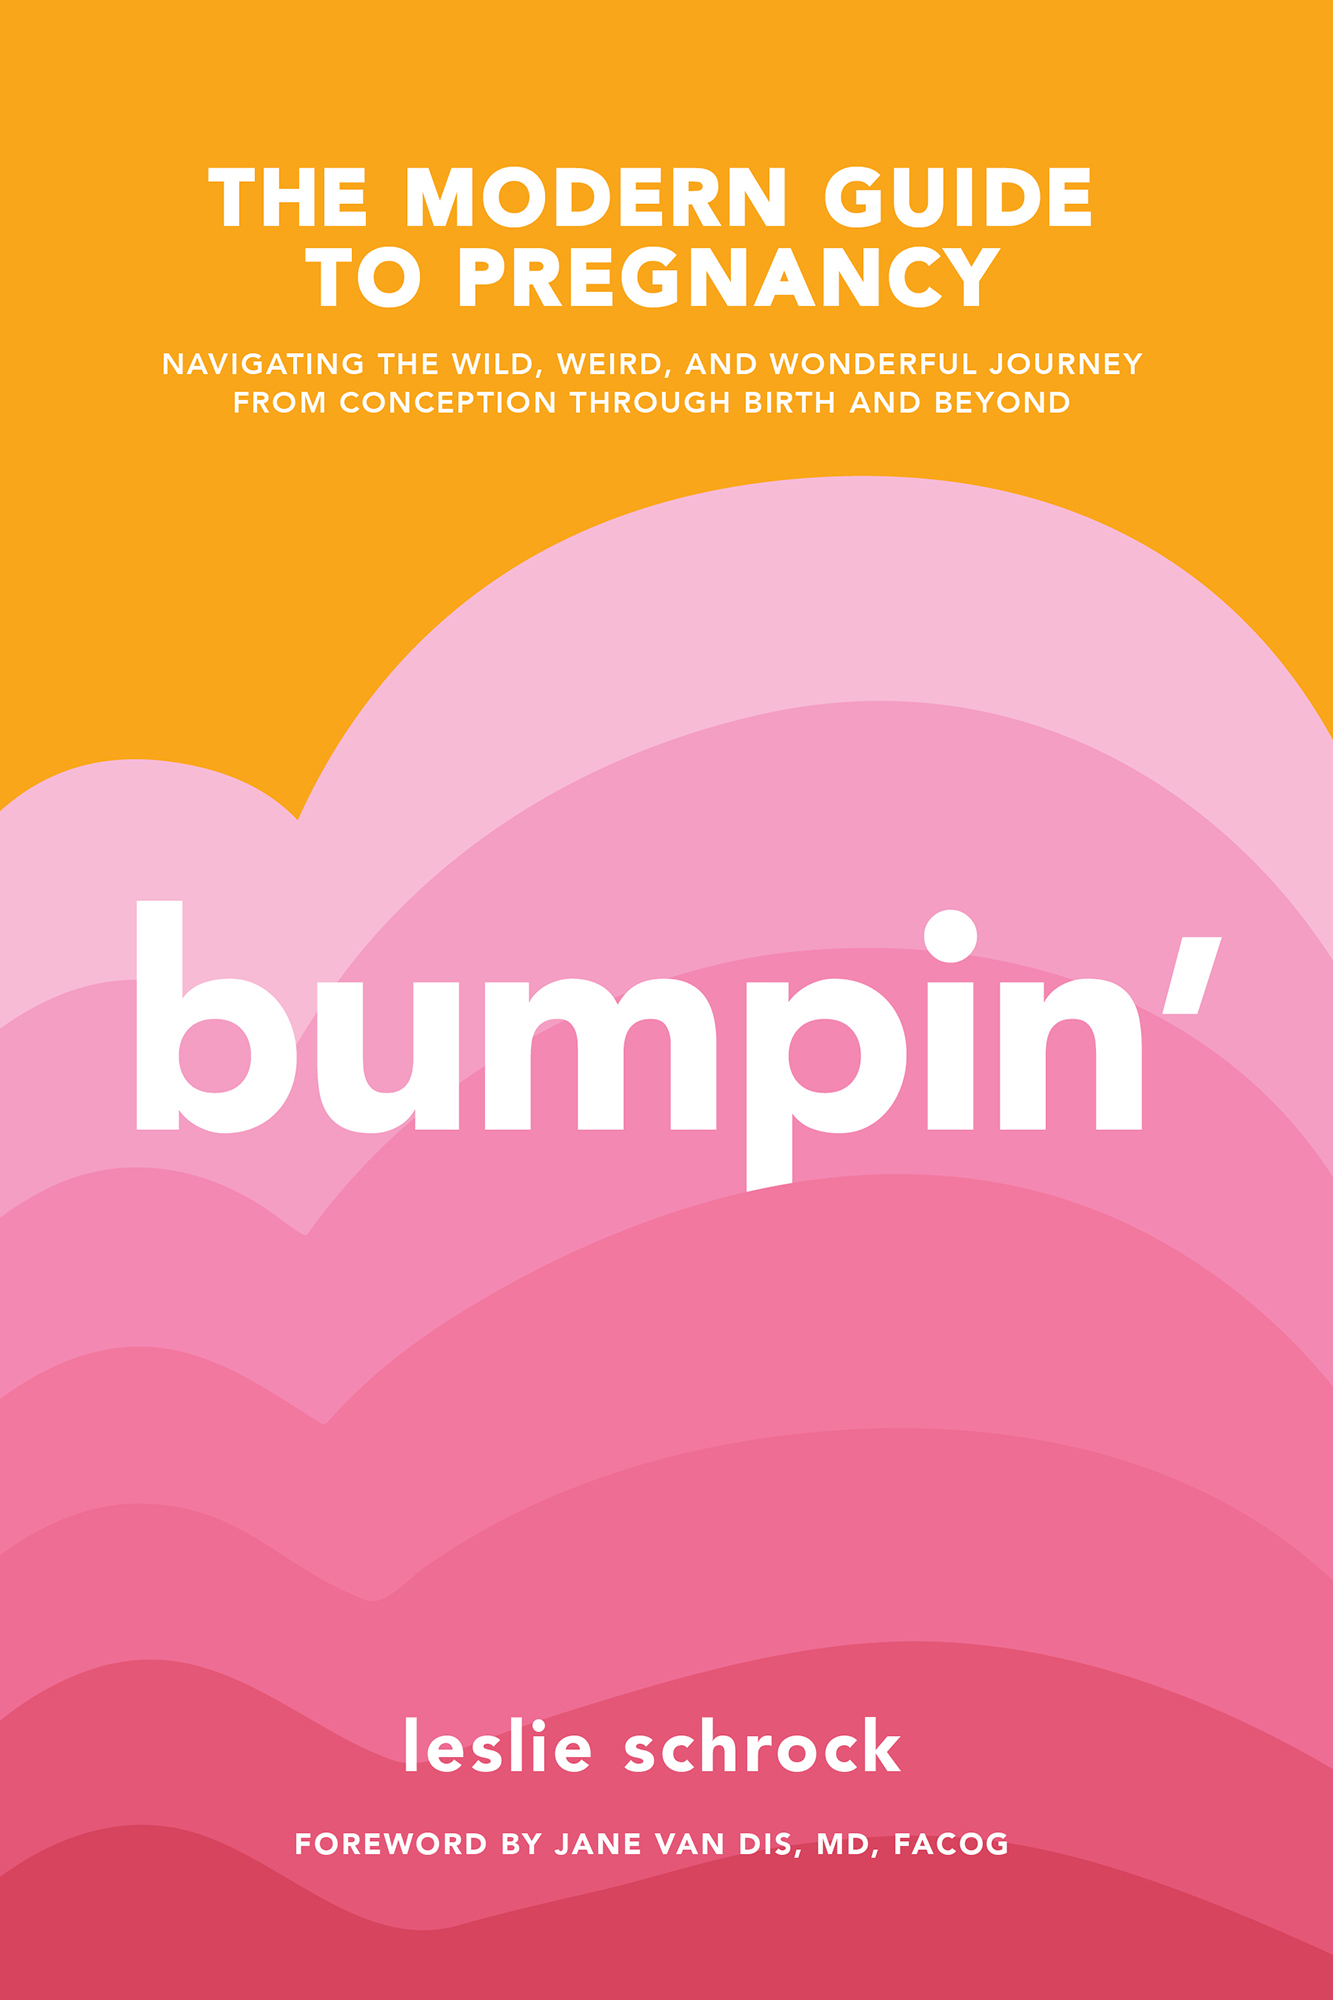 Bumpin the modern guide to pregnancy navigating the wild weird and wonderful journey from conception through birth and beyond - image 1